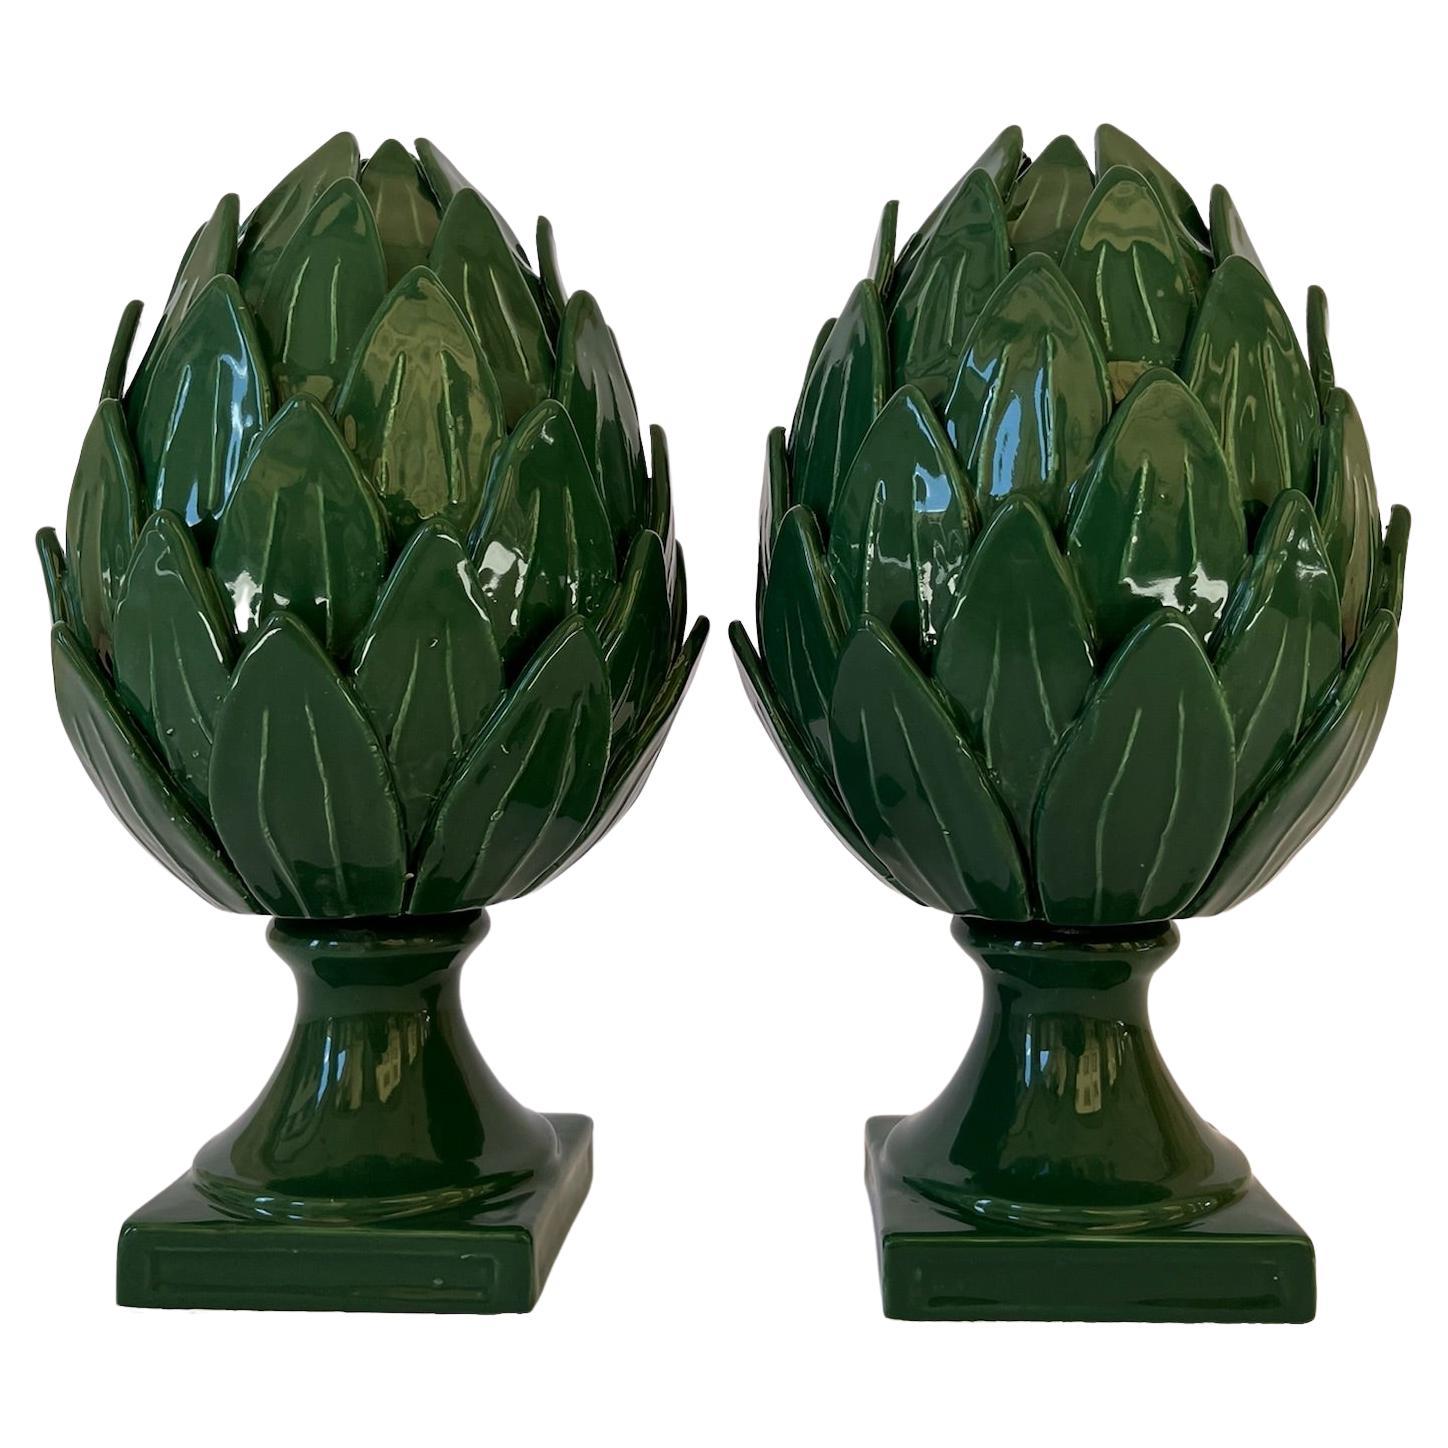 Pair of Small Green Artichokes For Sale